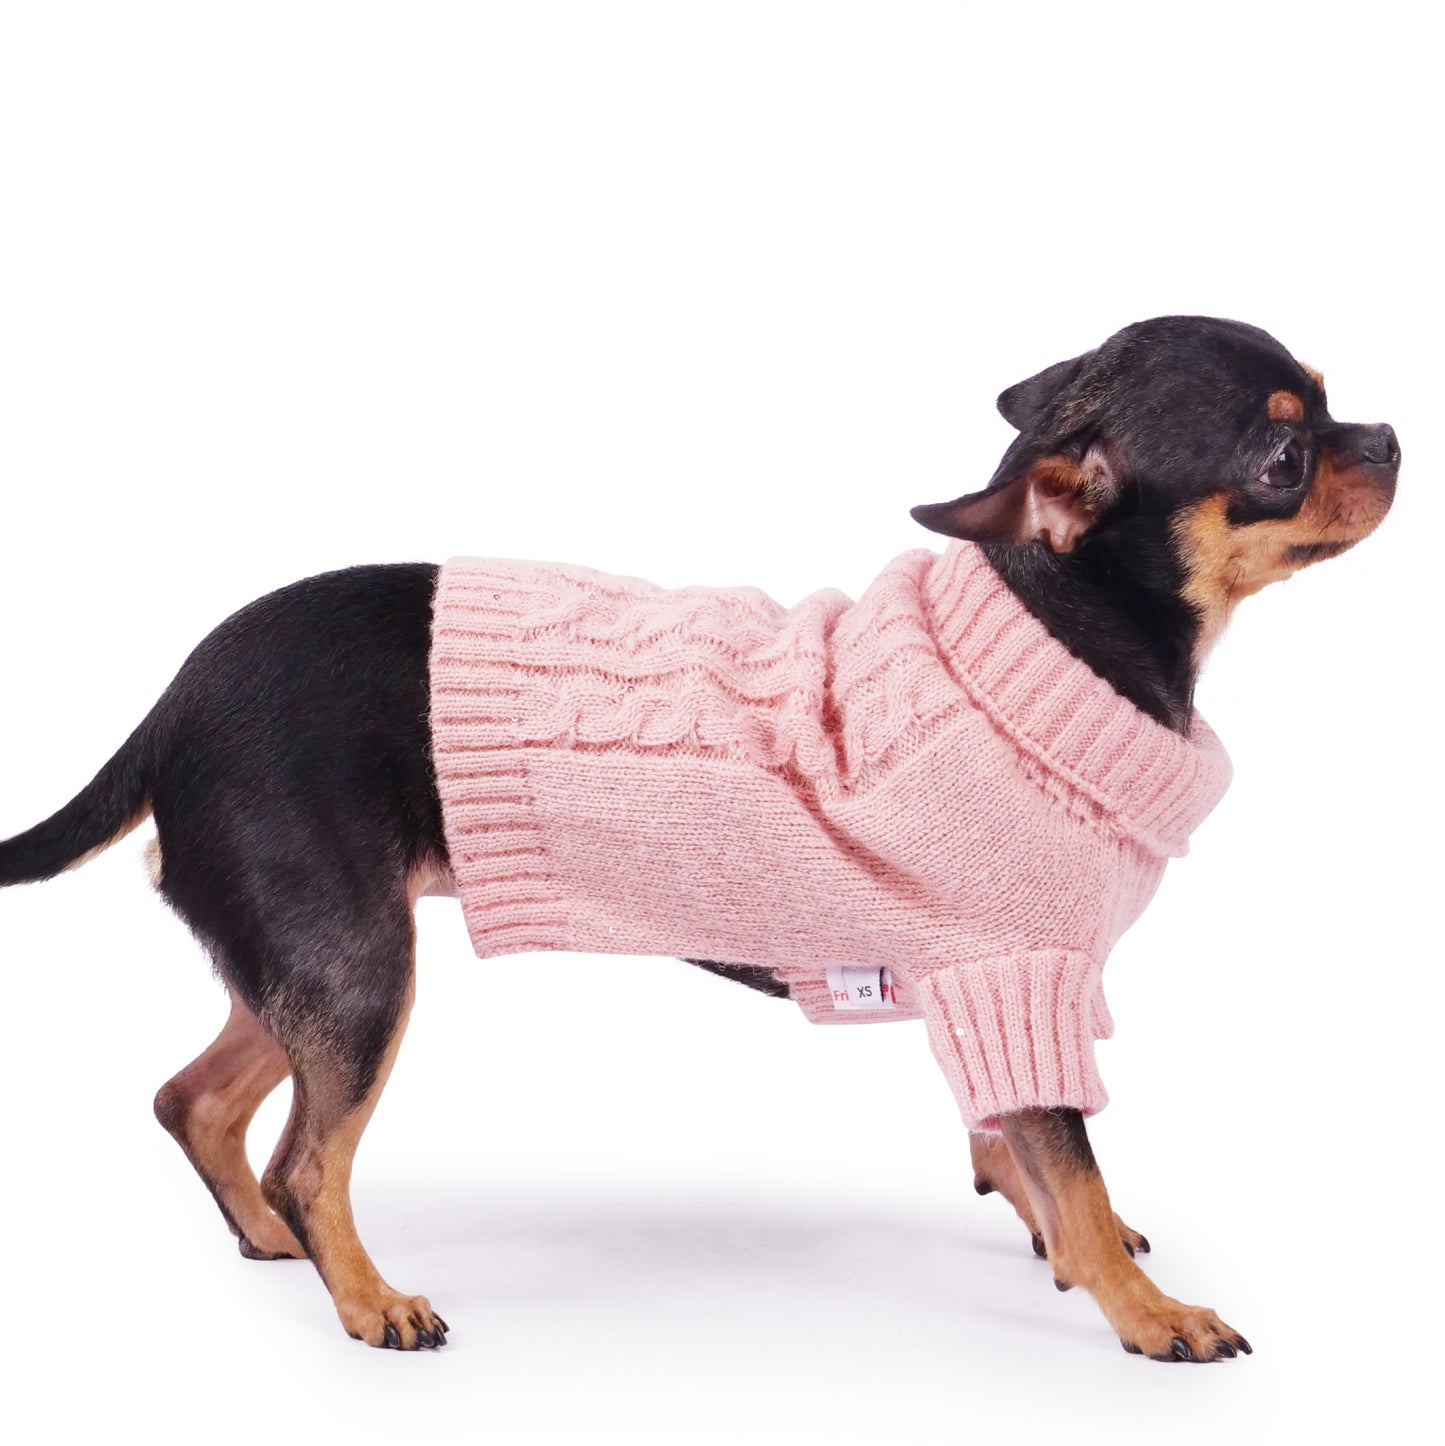 Frienperro Puppy Sweater Sequins Cable Knit Pullover